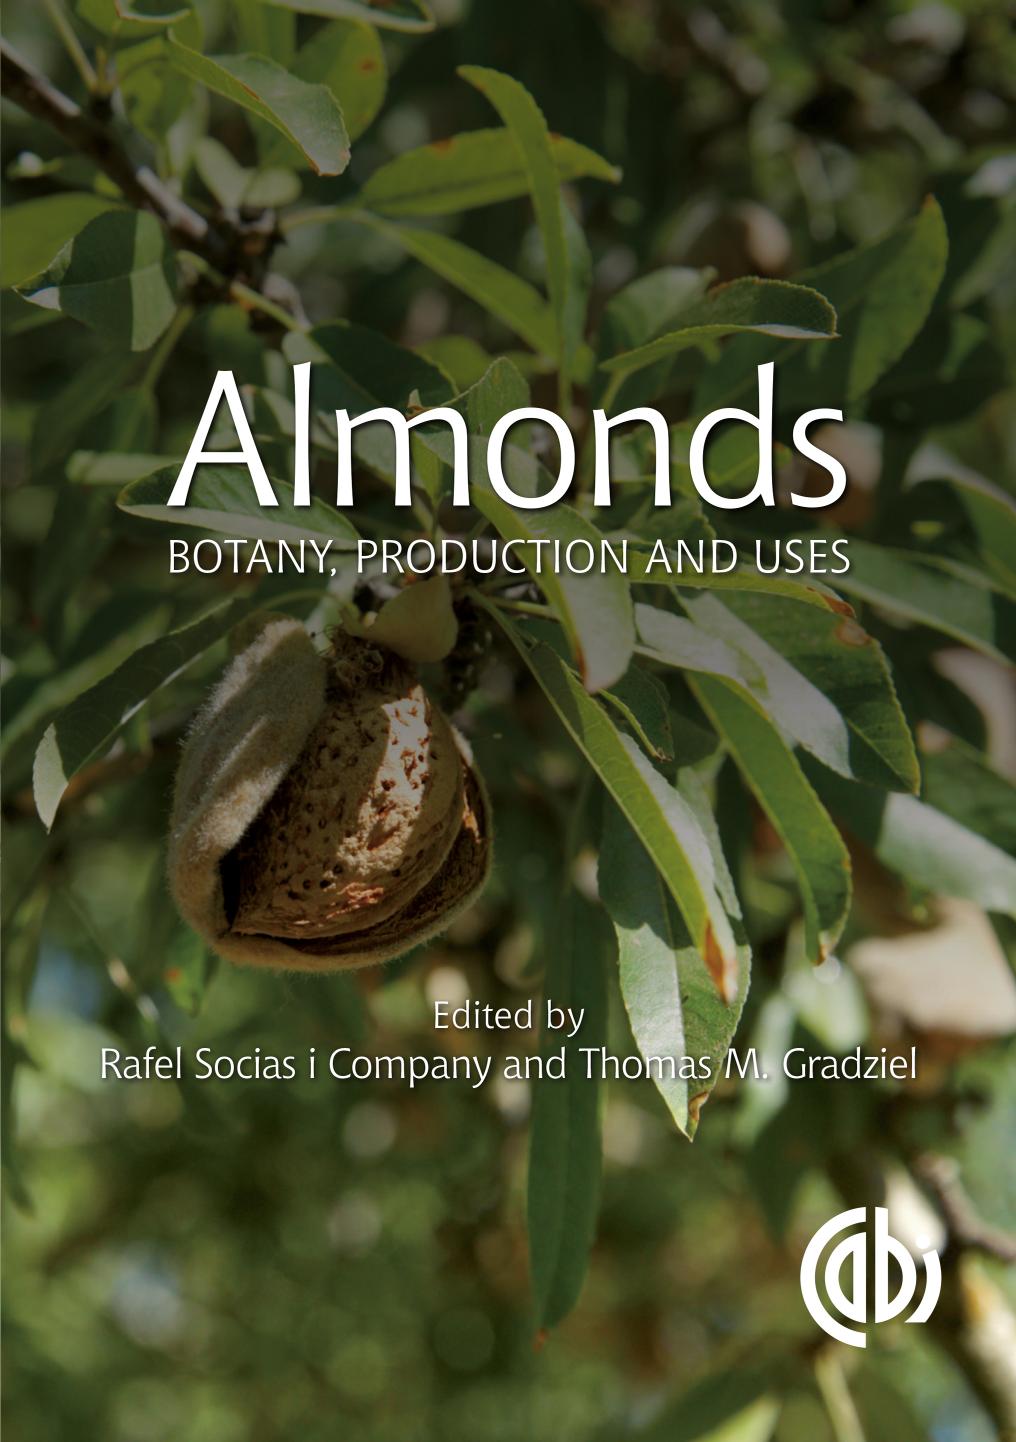 Almonds Botany, Production and Uses 2017